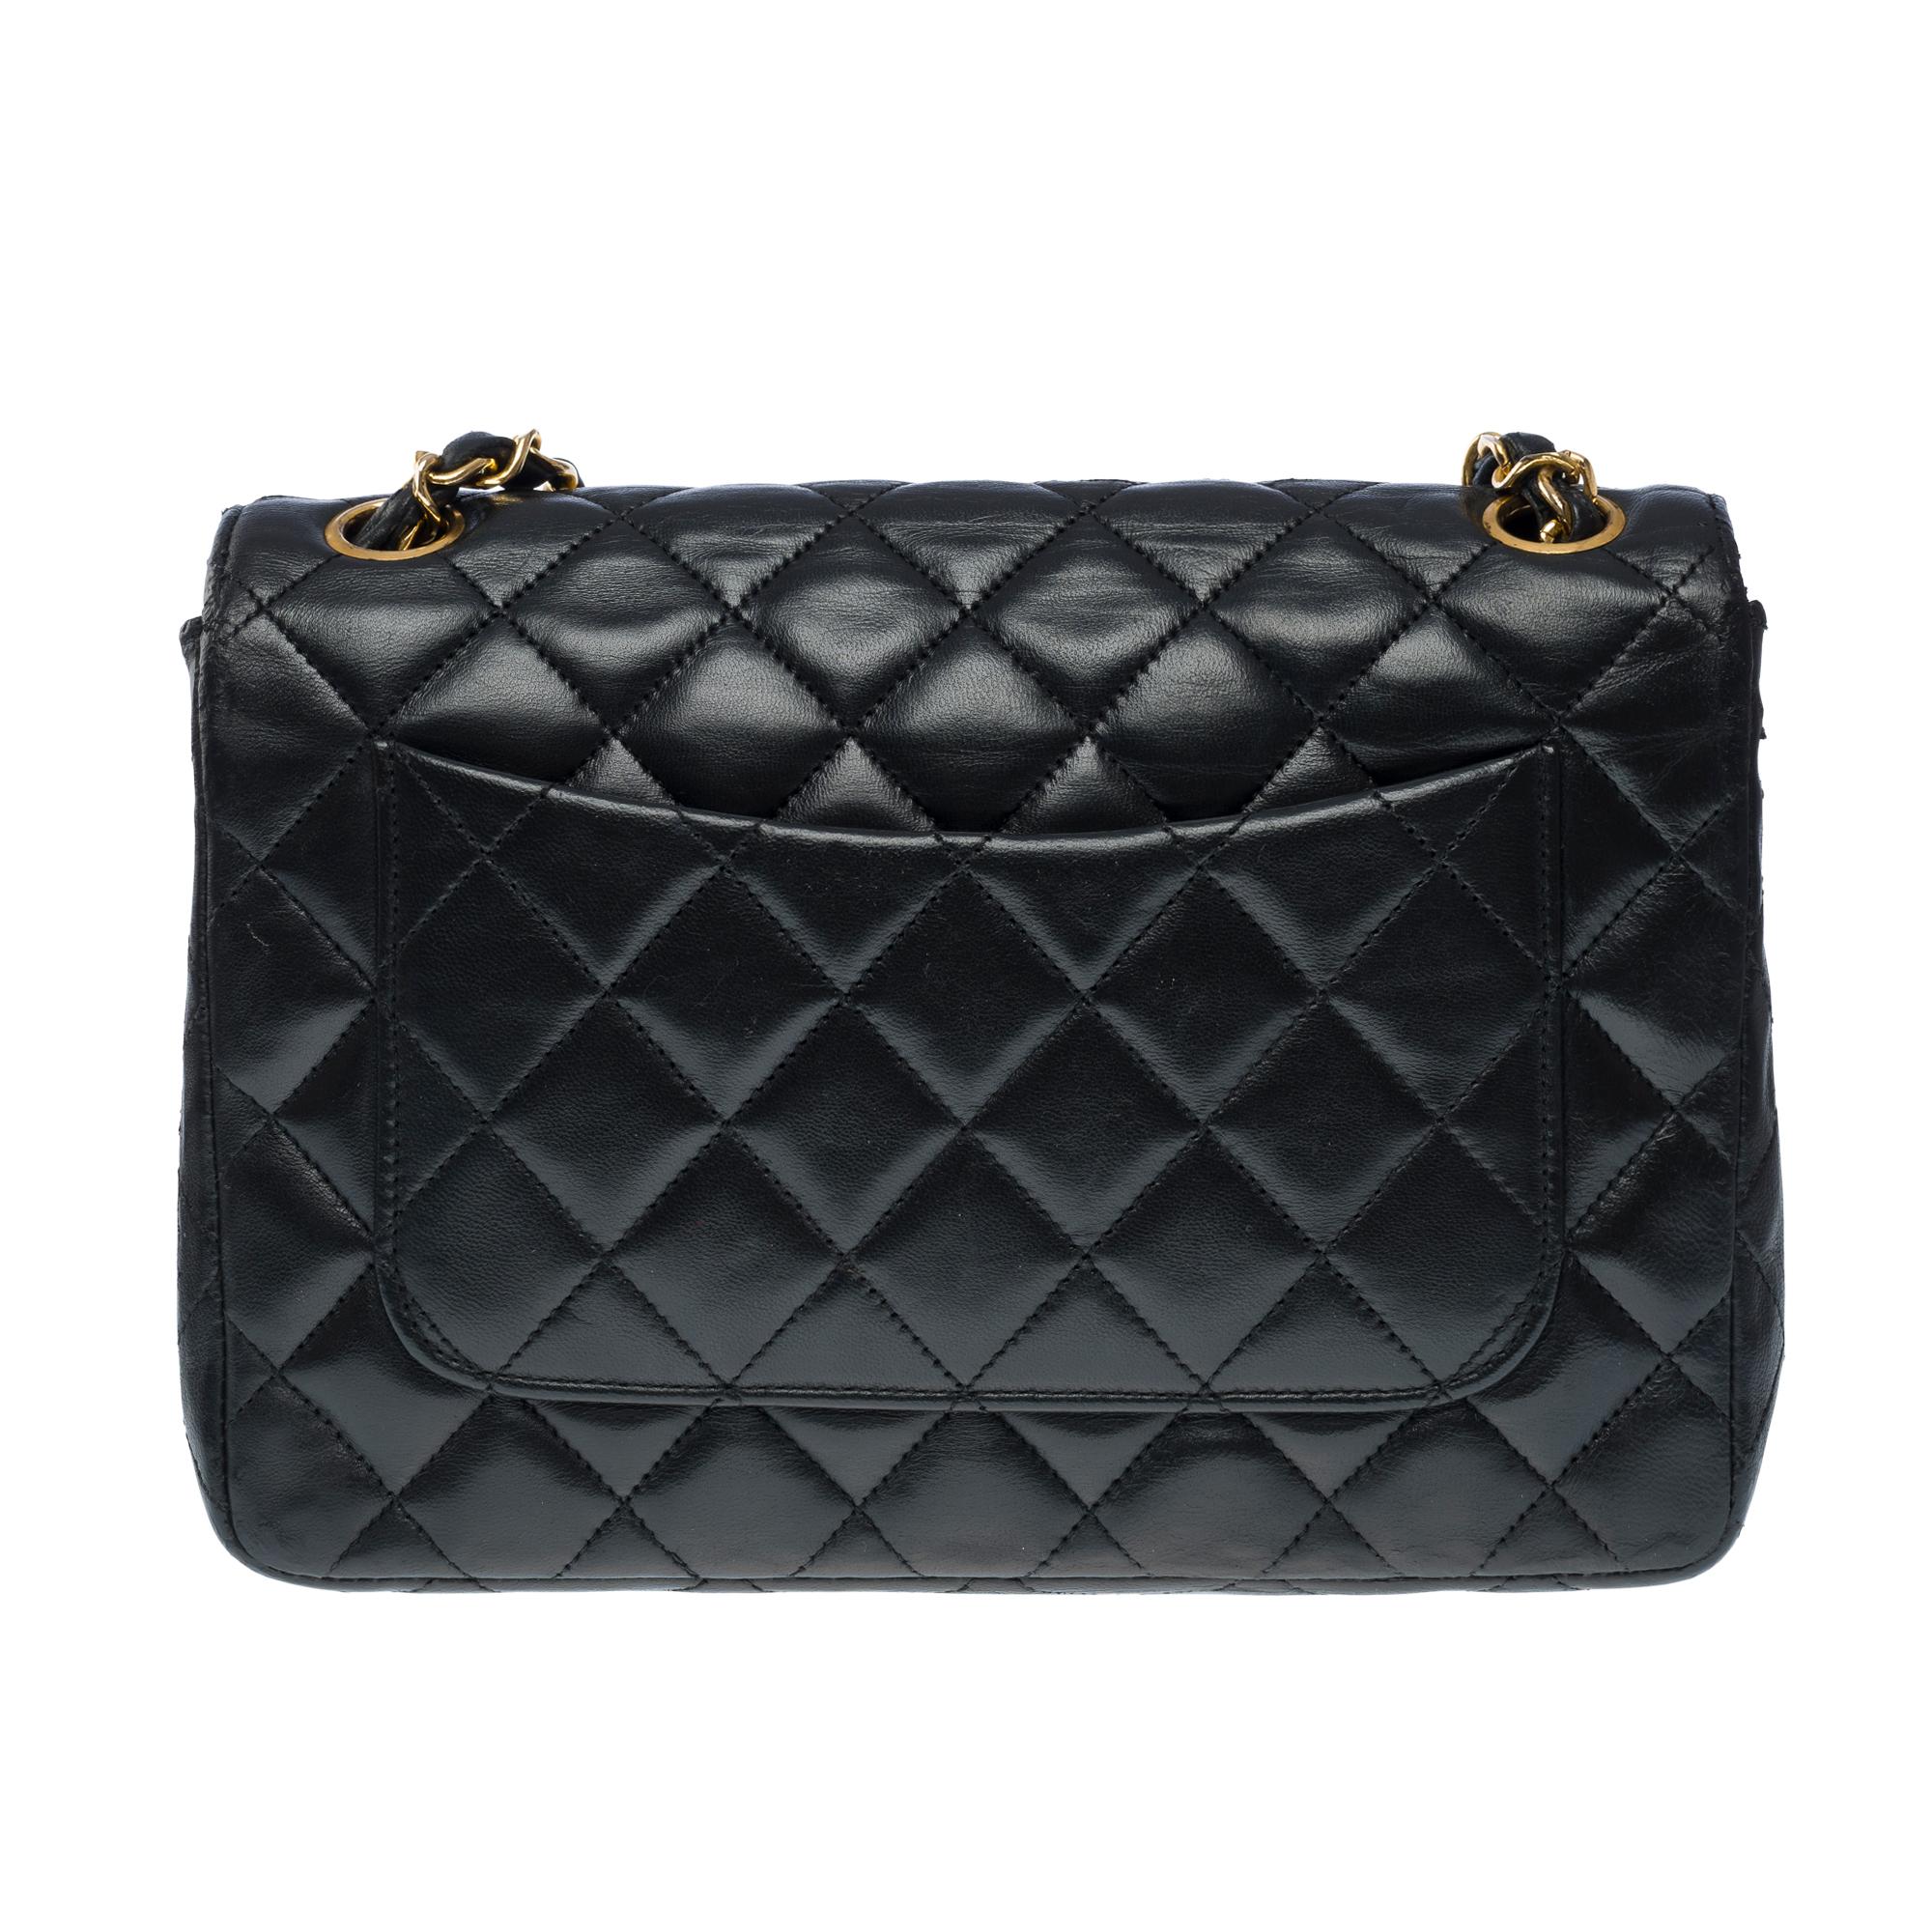 Women's Chanel Classic Full Flap shoulder bag in black quilted lambskin leather, GHW For Sale